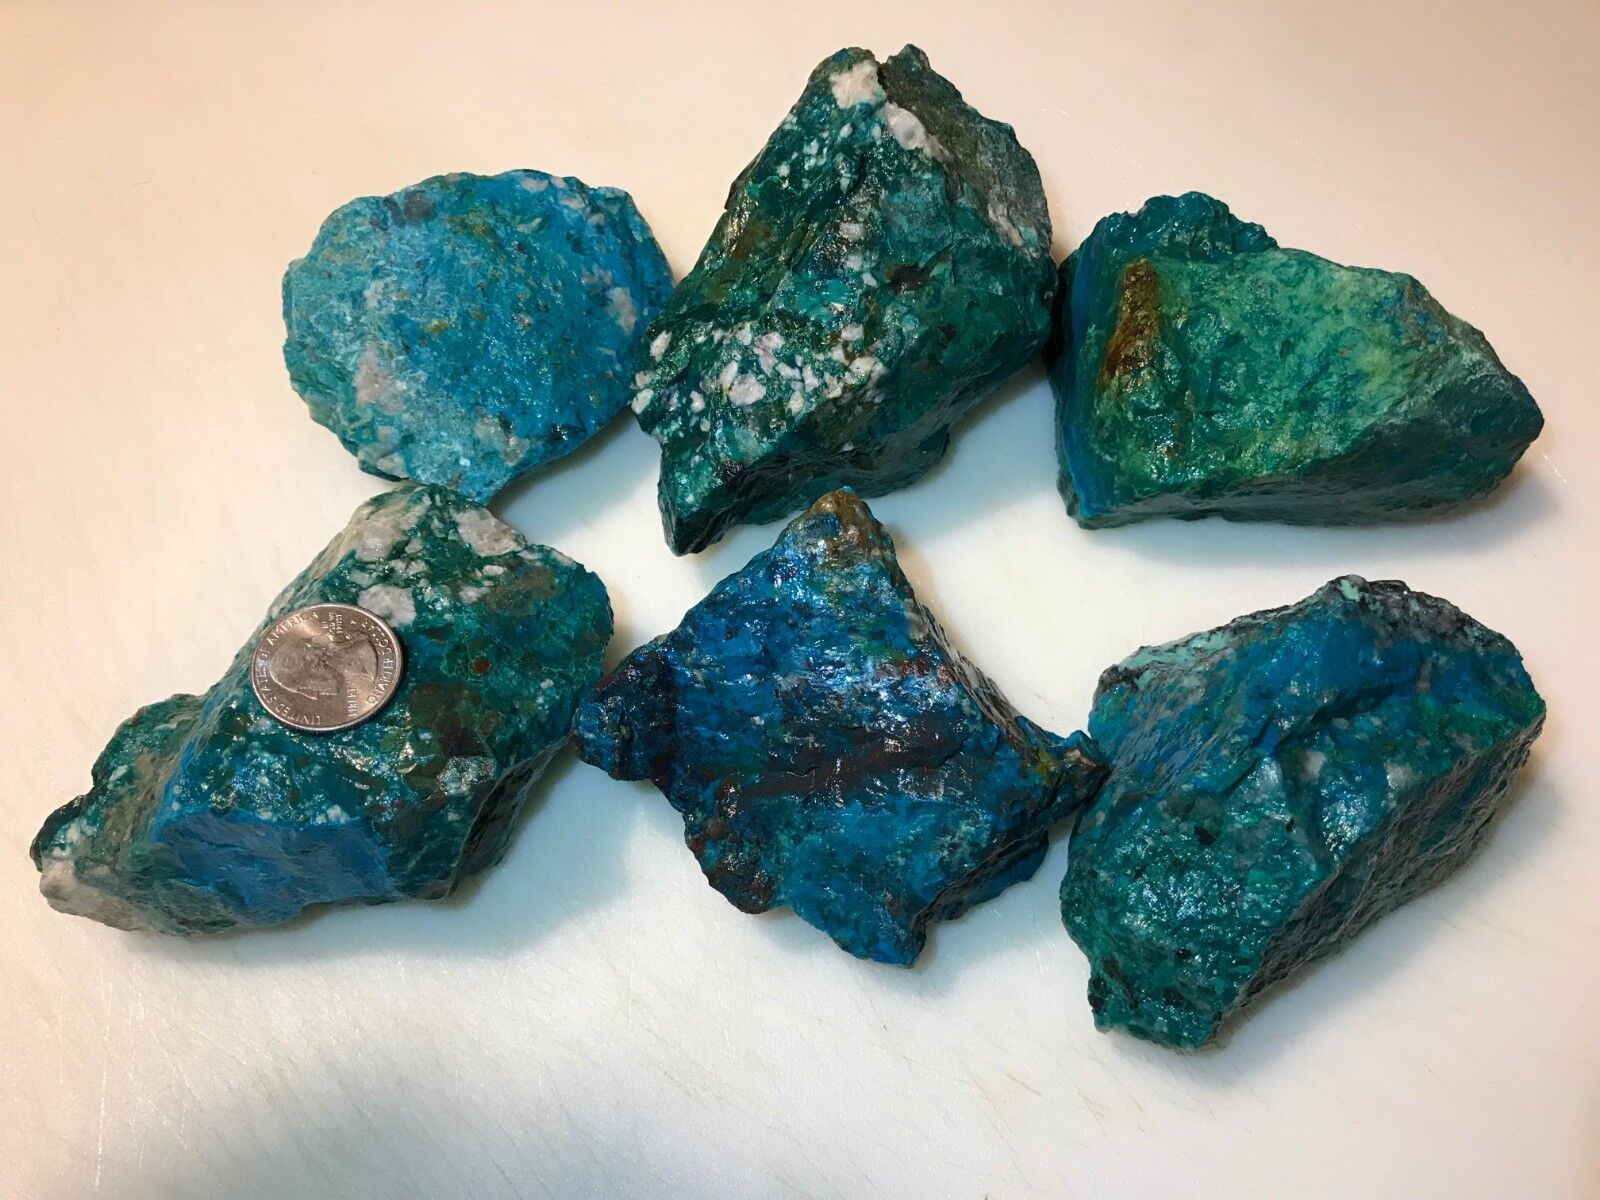 5 Pound Lots of  ALL NATURAL Chrysocolla & Turquoise Rough (Large Pieces) (WET) Без бренда - фотография #10